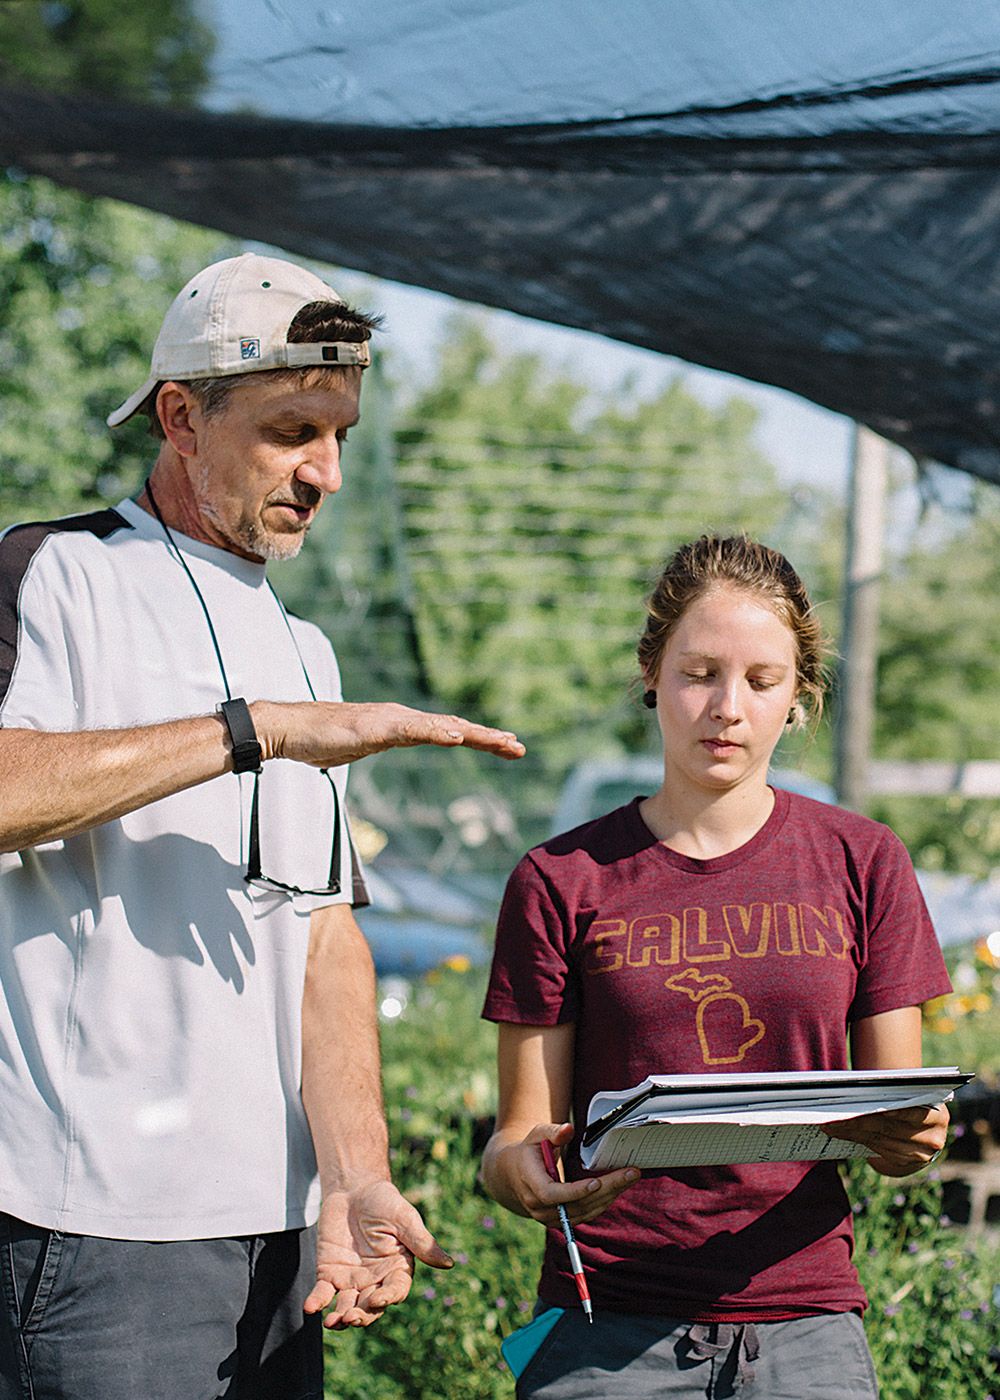 Calvin professor David Warners instructs a student out in the field, gesturing with his hands.